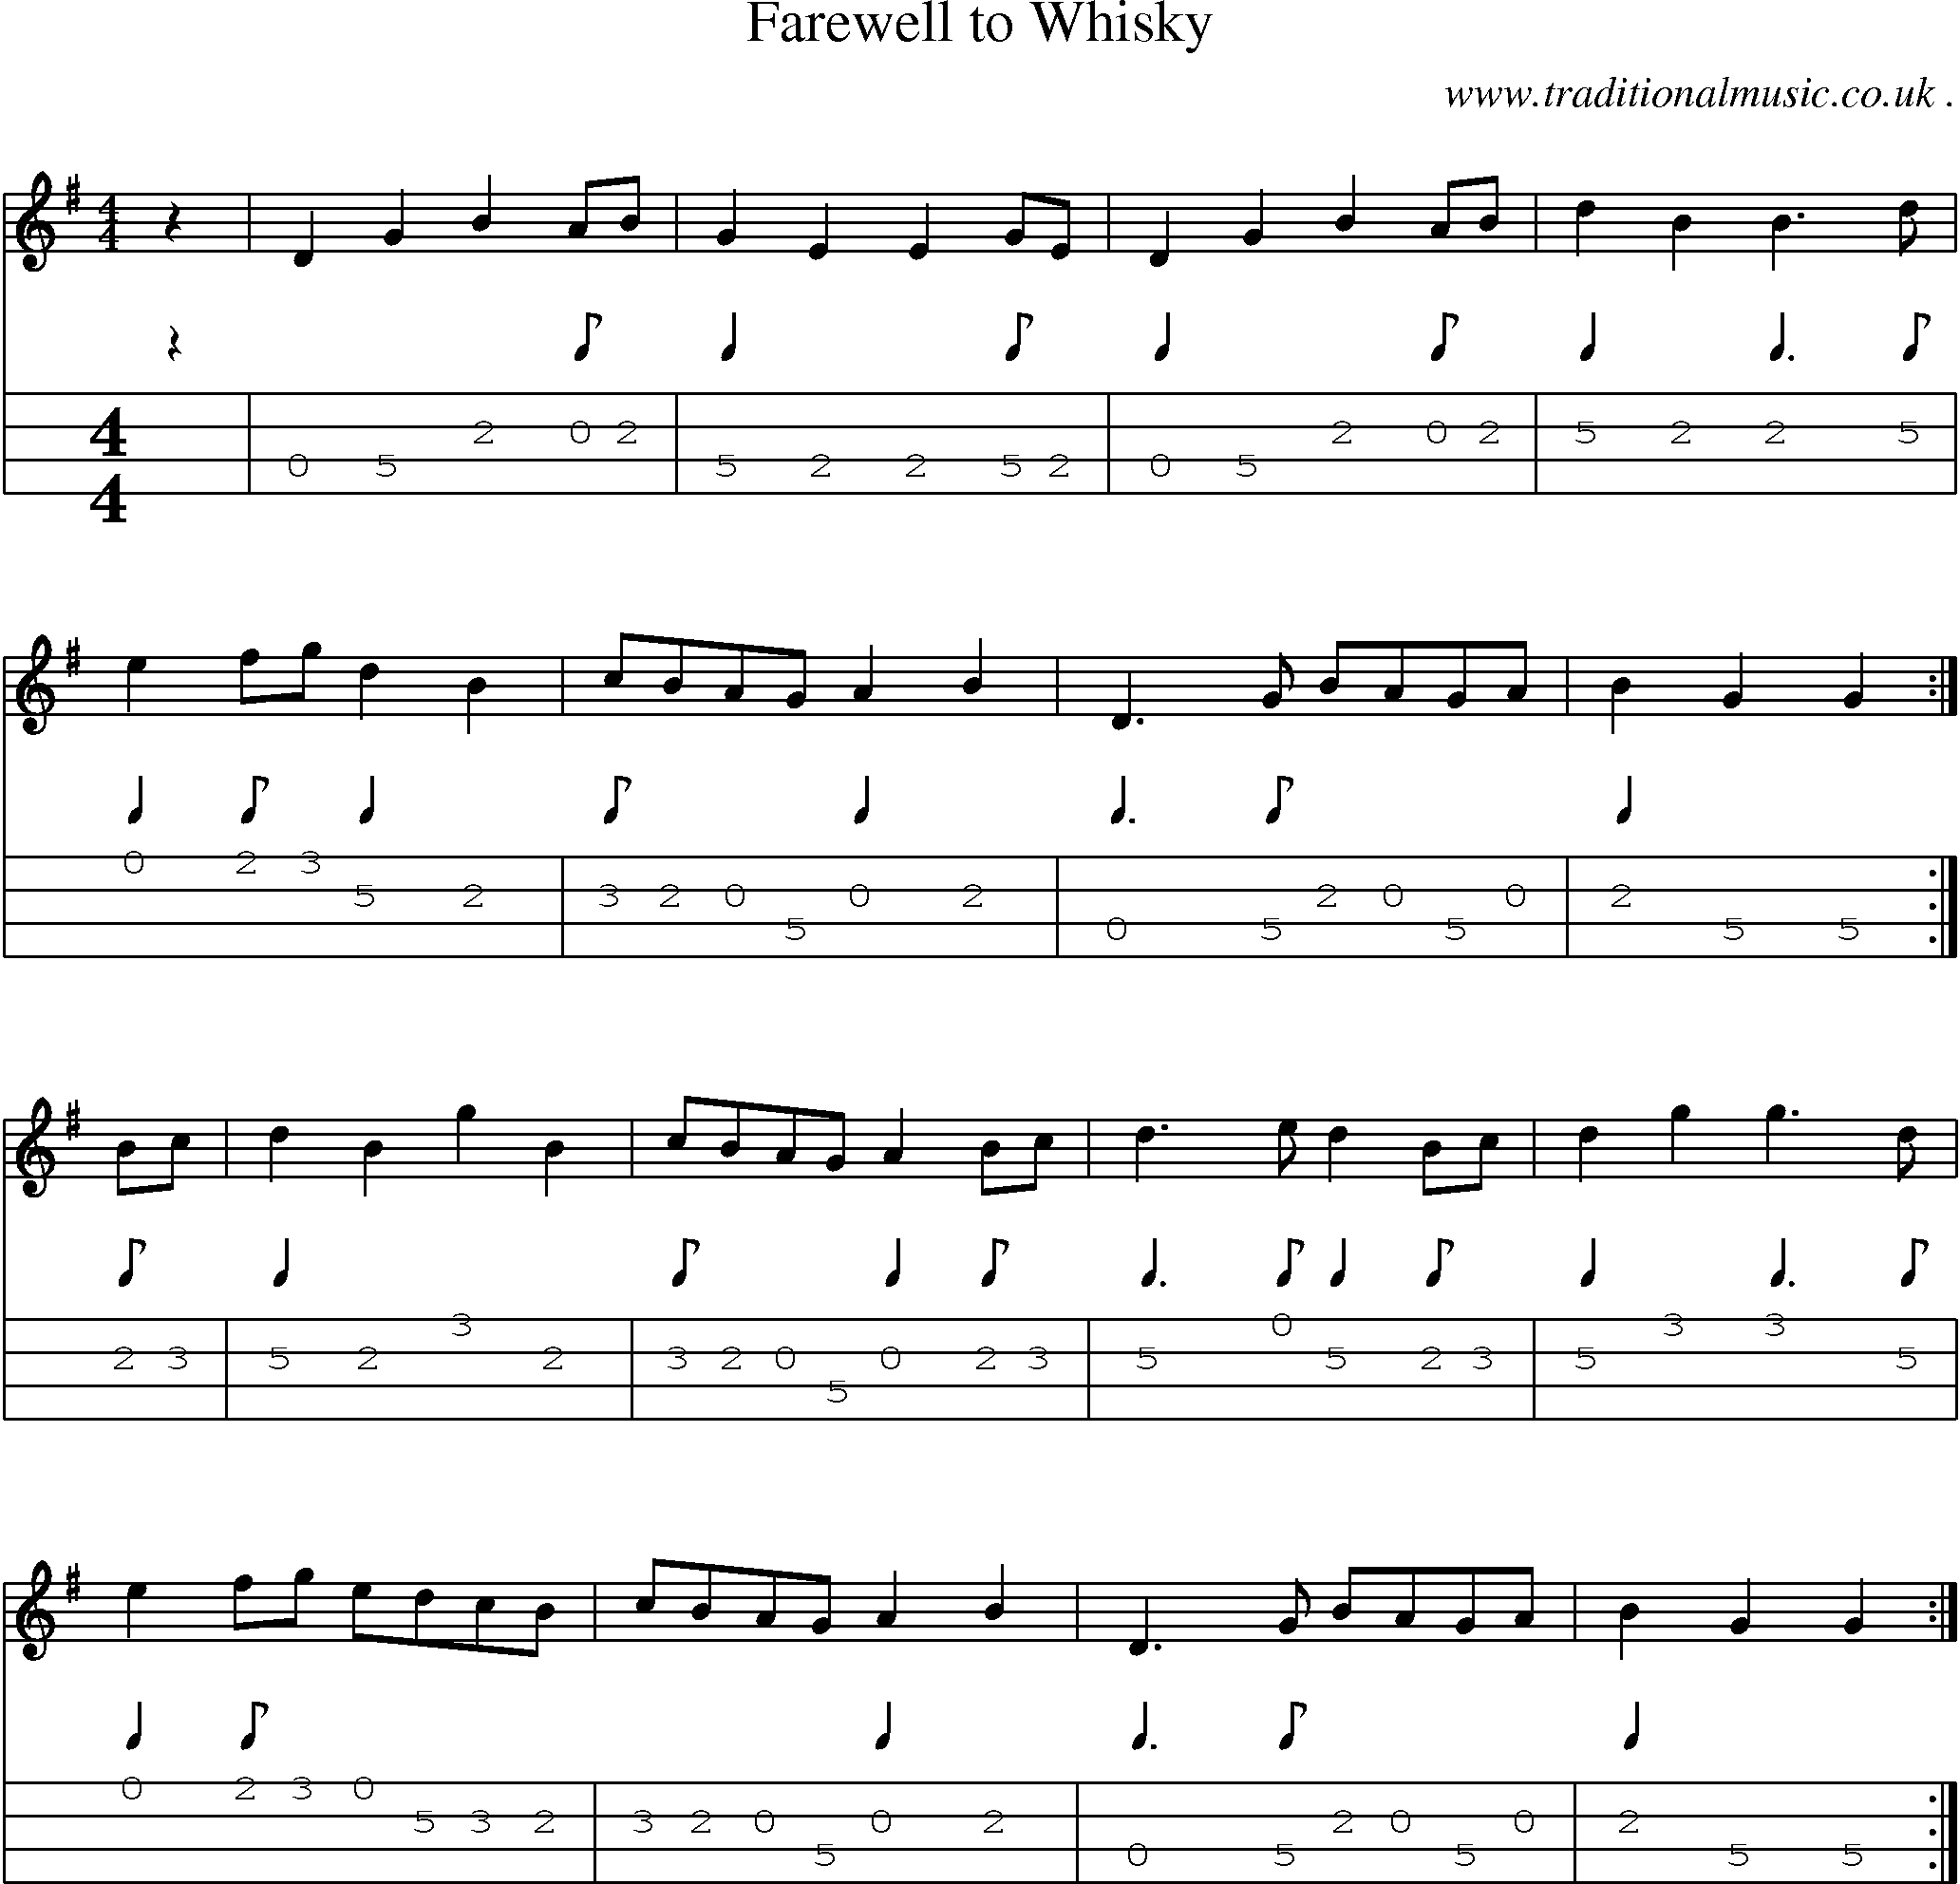 Sheet-music  score, Chords and Mandolin Tabs for Farewell To Whisky